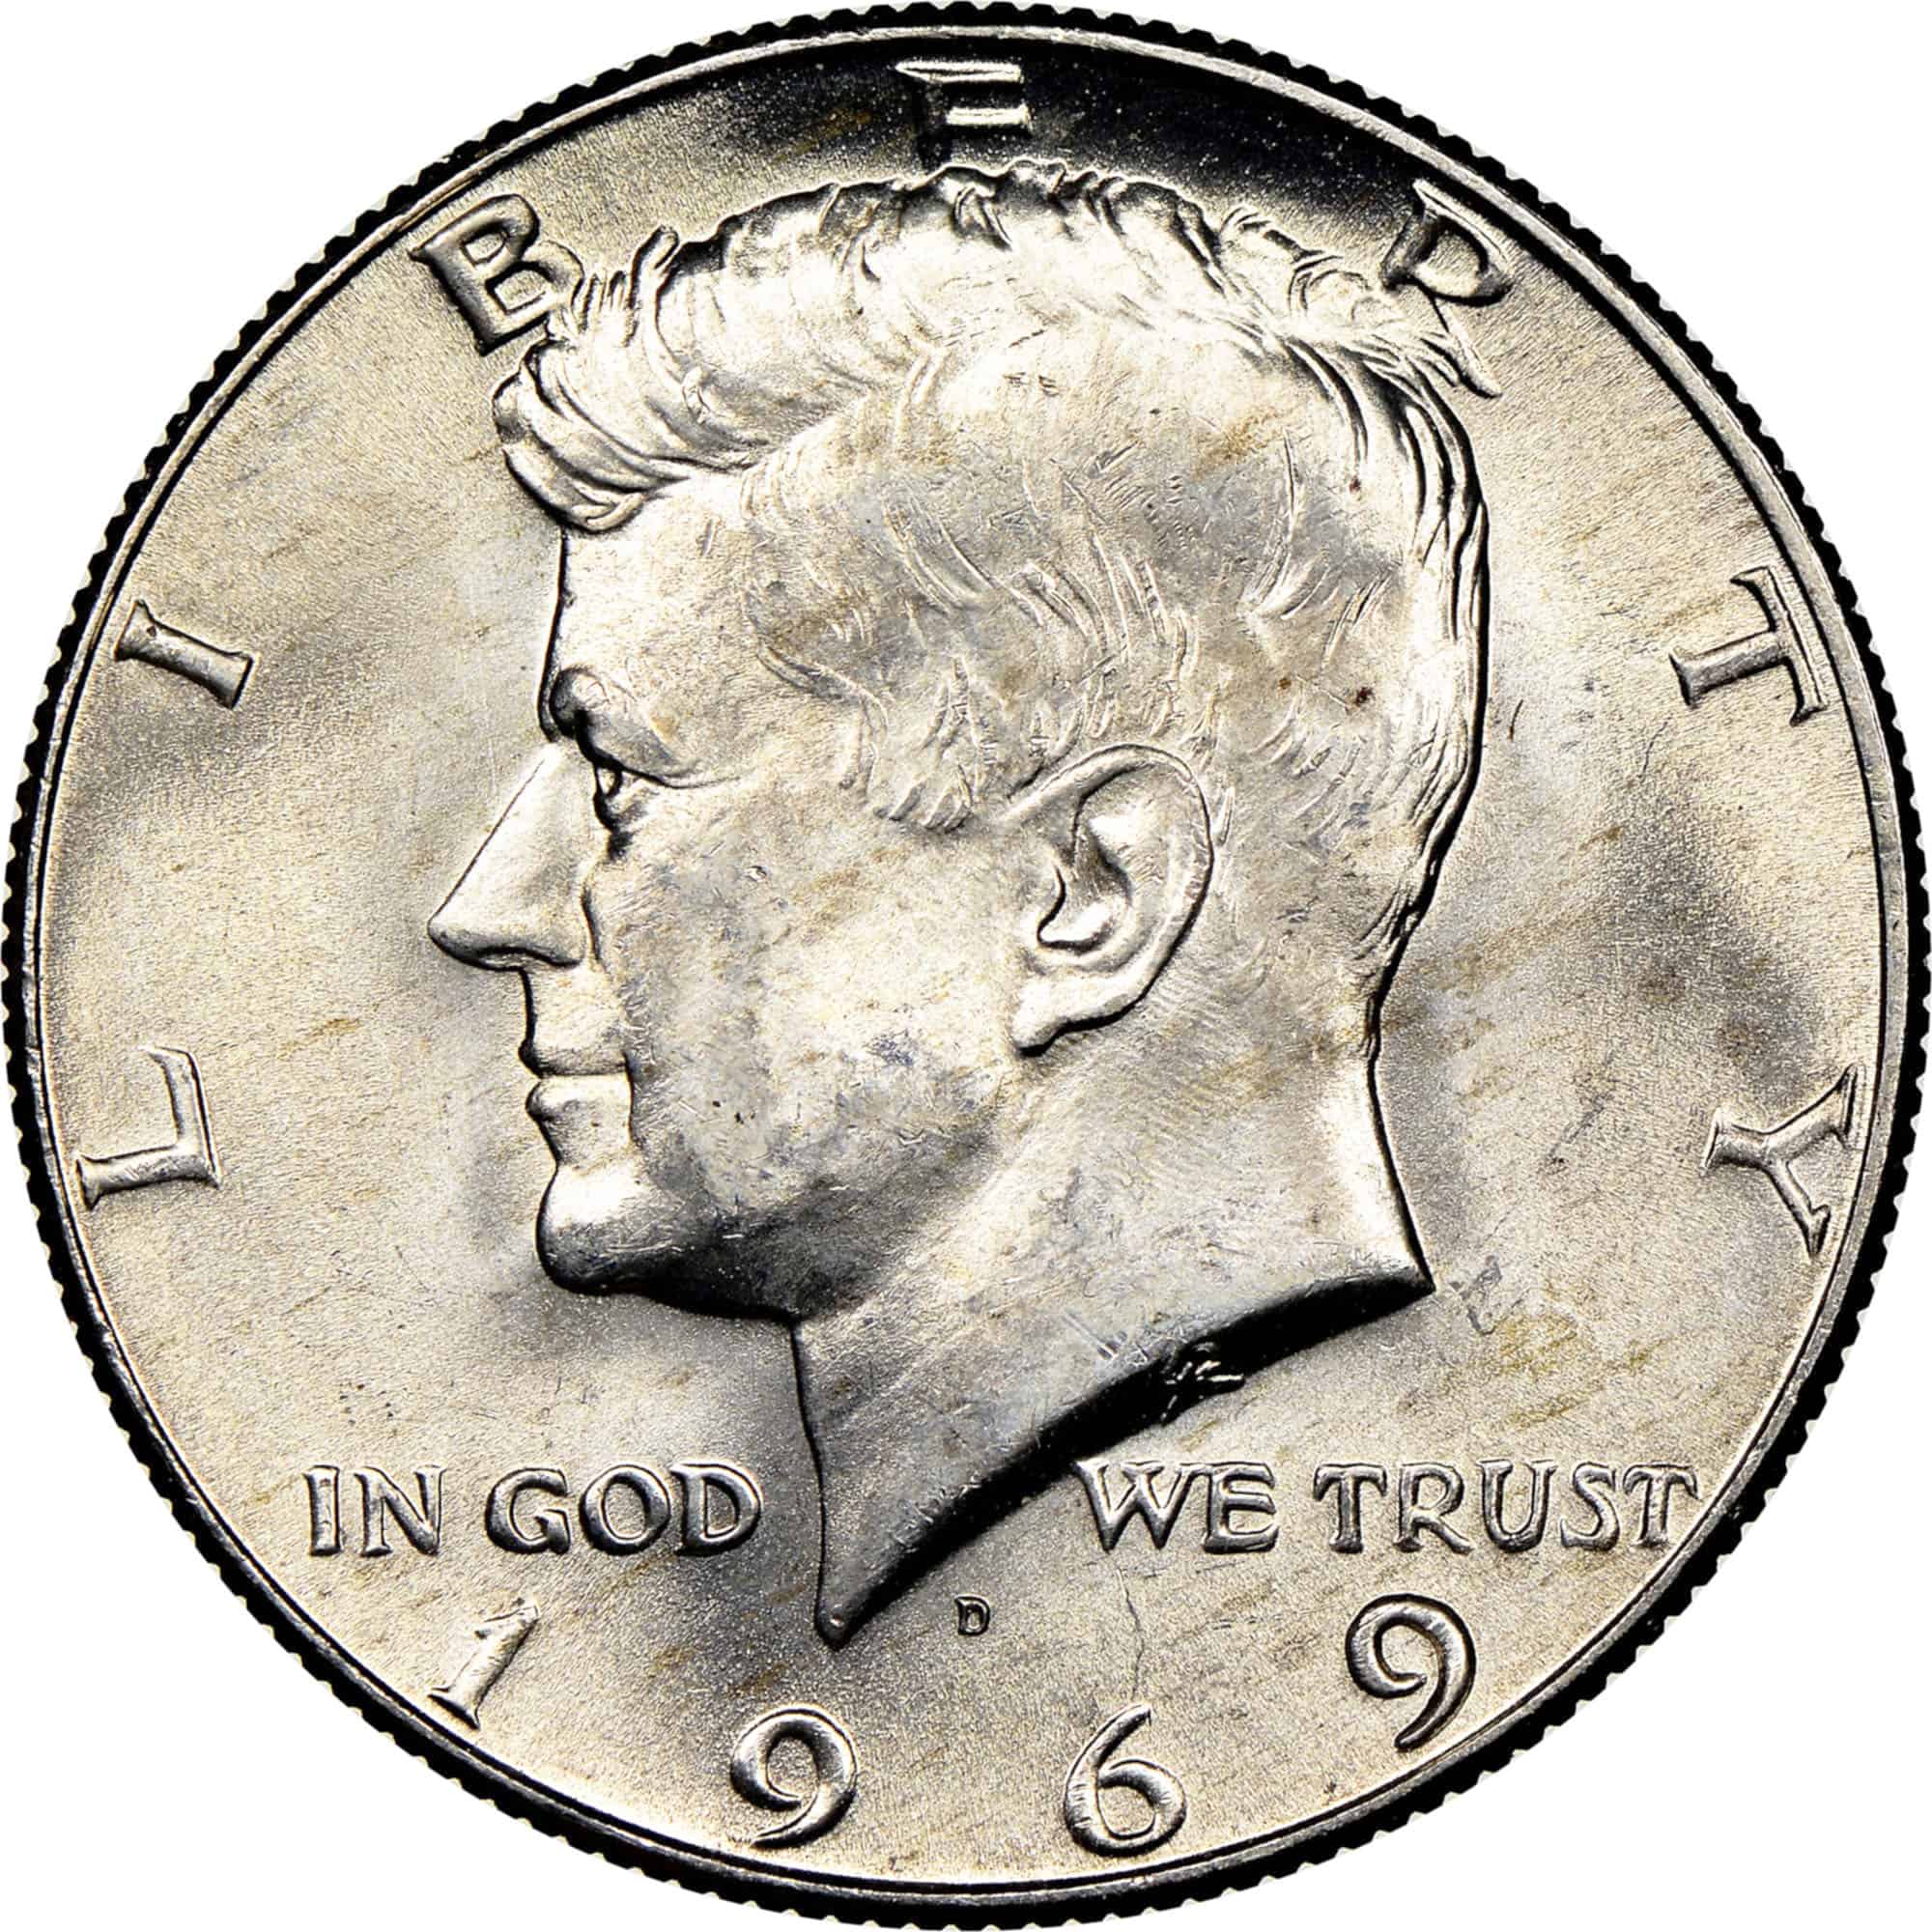 The Obverse of the 1969 Half Dollar